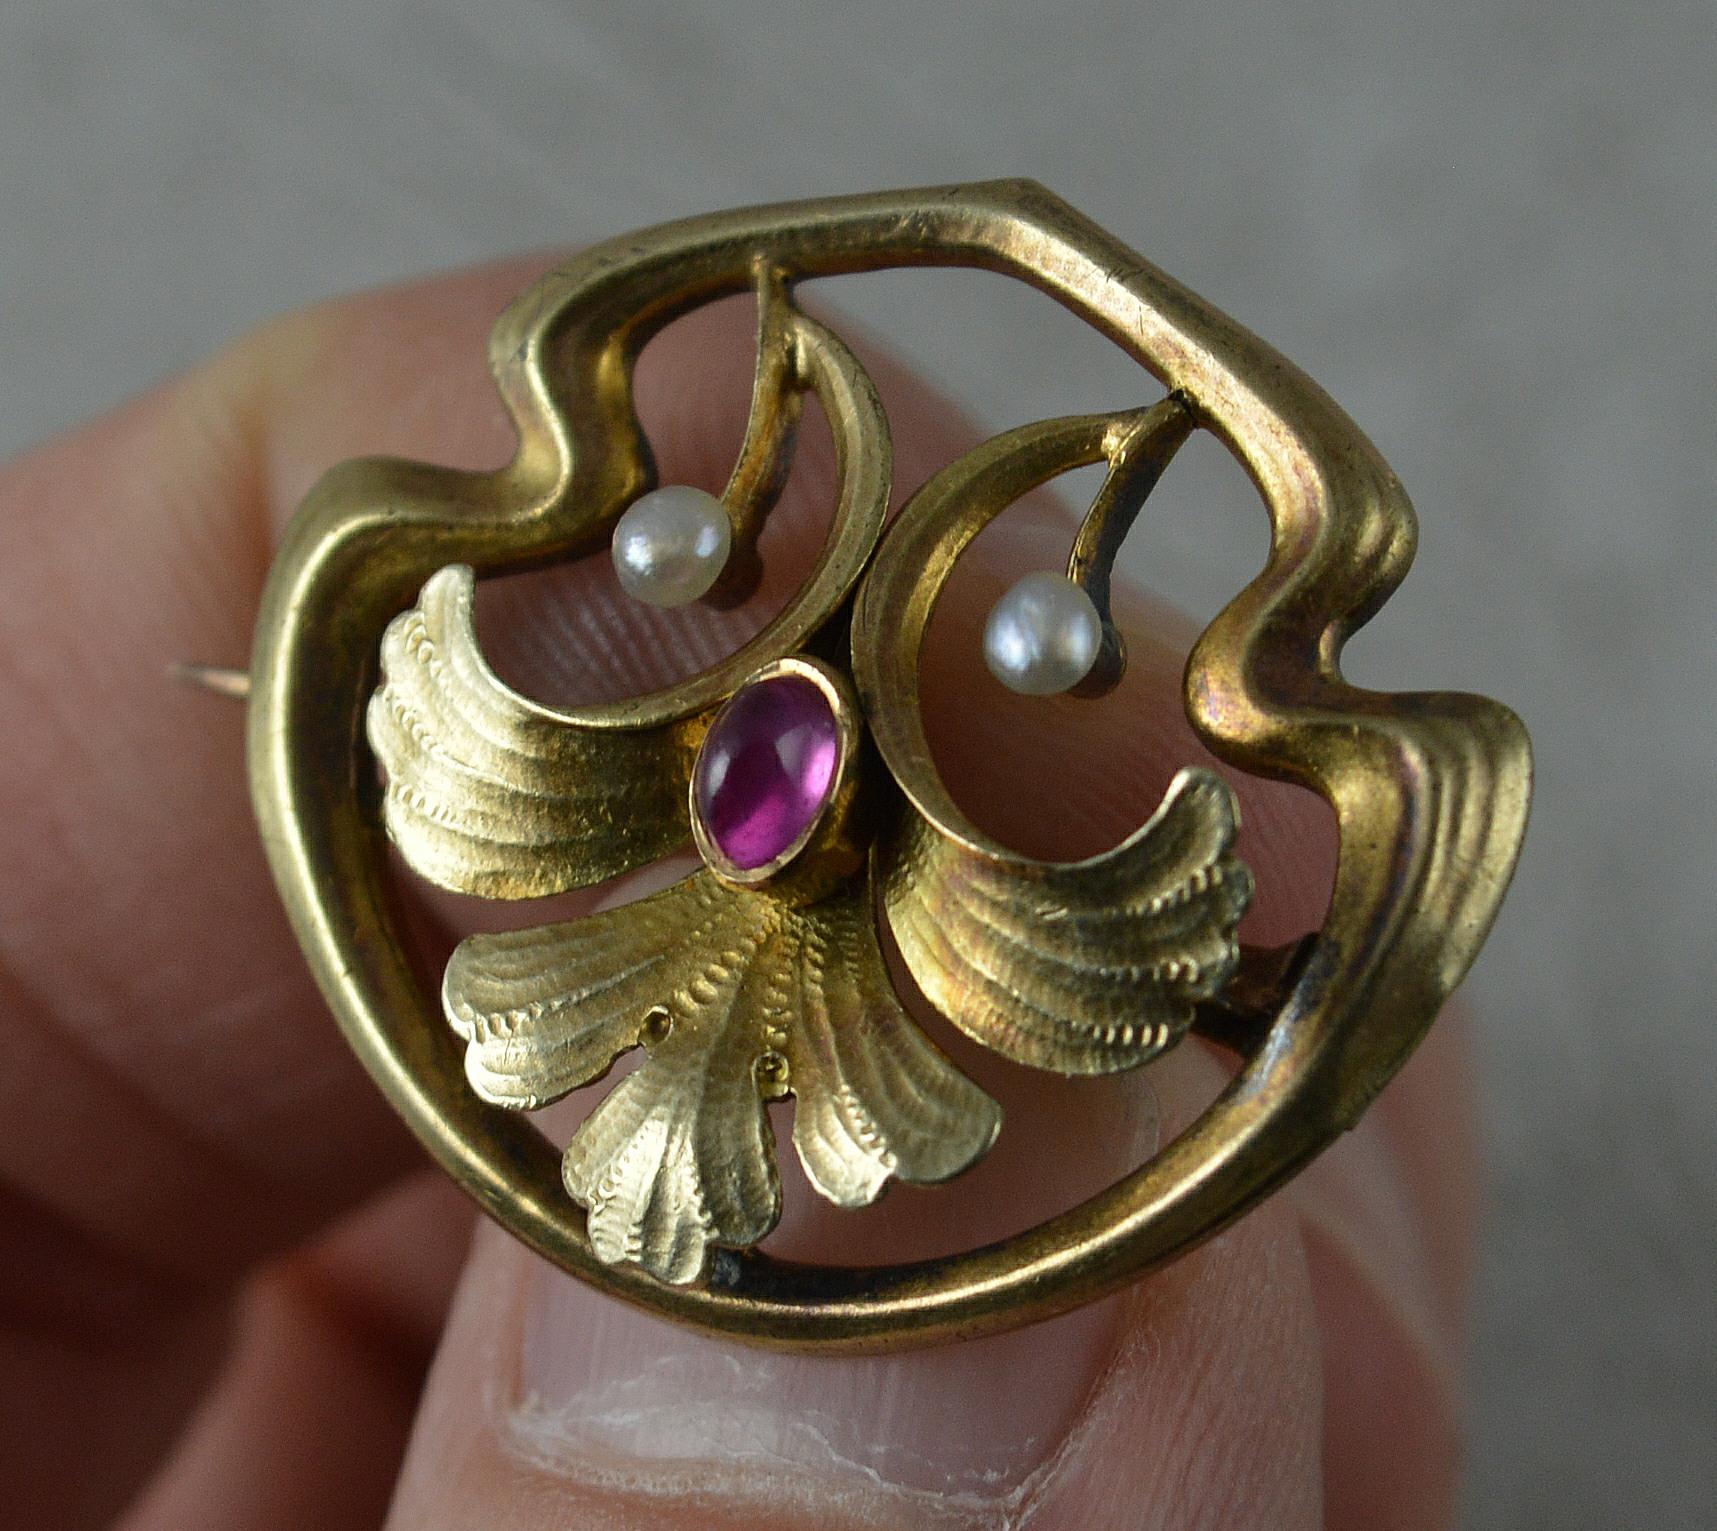 A stunning Edwardian era brooch.
Art nouveau shape and style, well made piece.
14 carat rose gold example. Designed with an oval ruby cabochon to centre and two smaller pearls. 
Stylish shape and floral details.

CONDITION ; Very good for age.